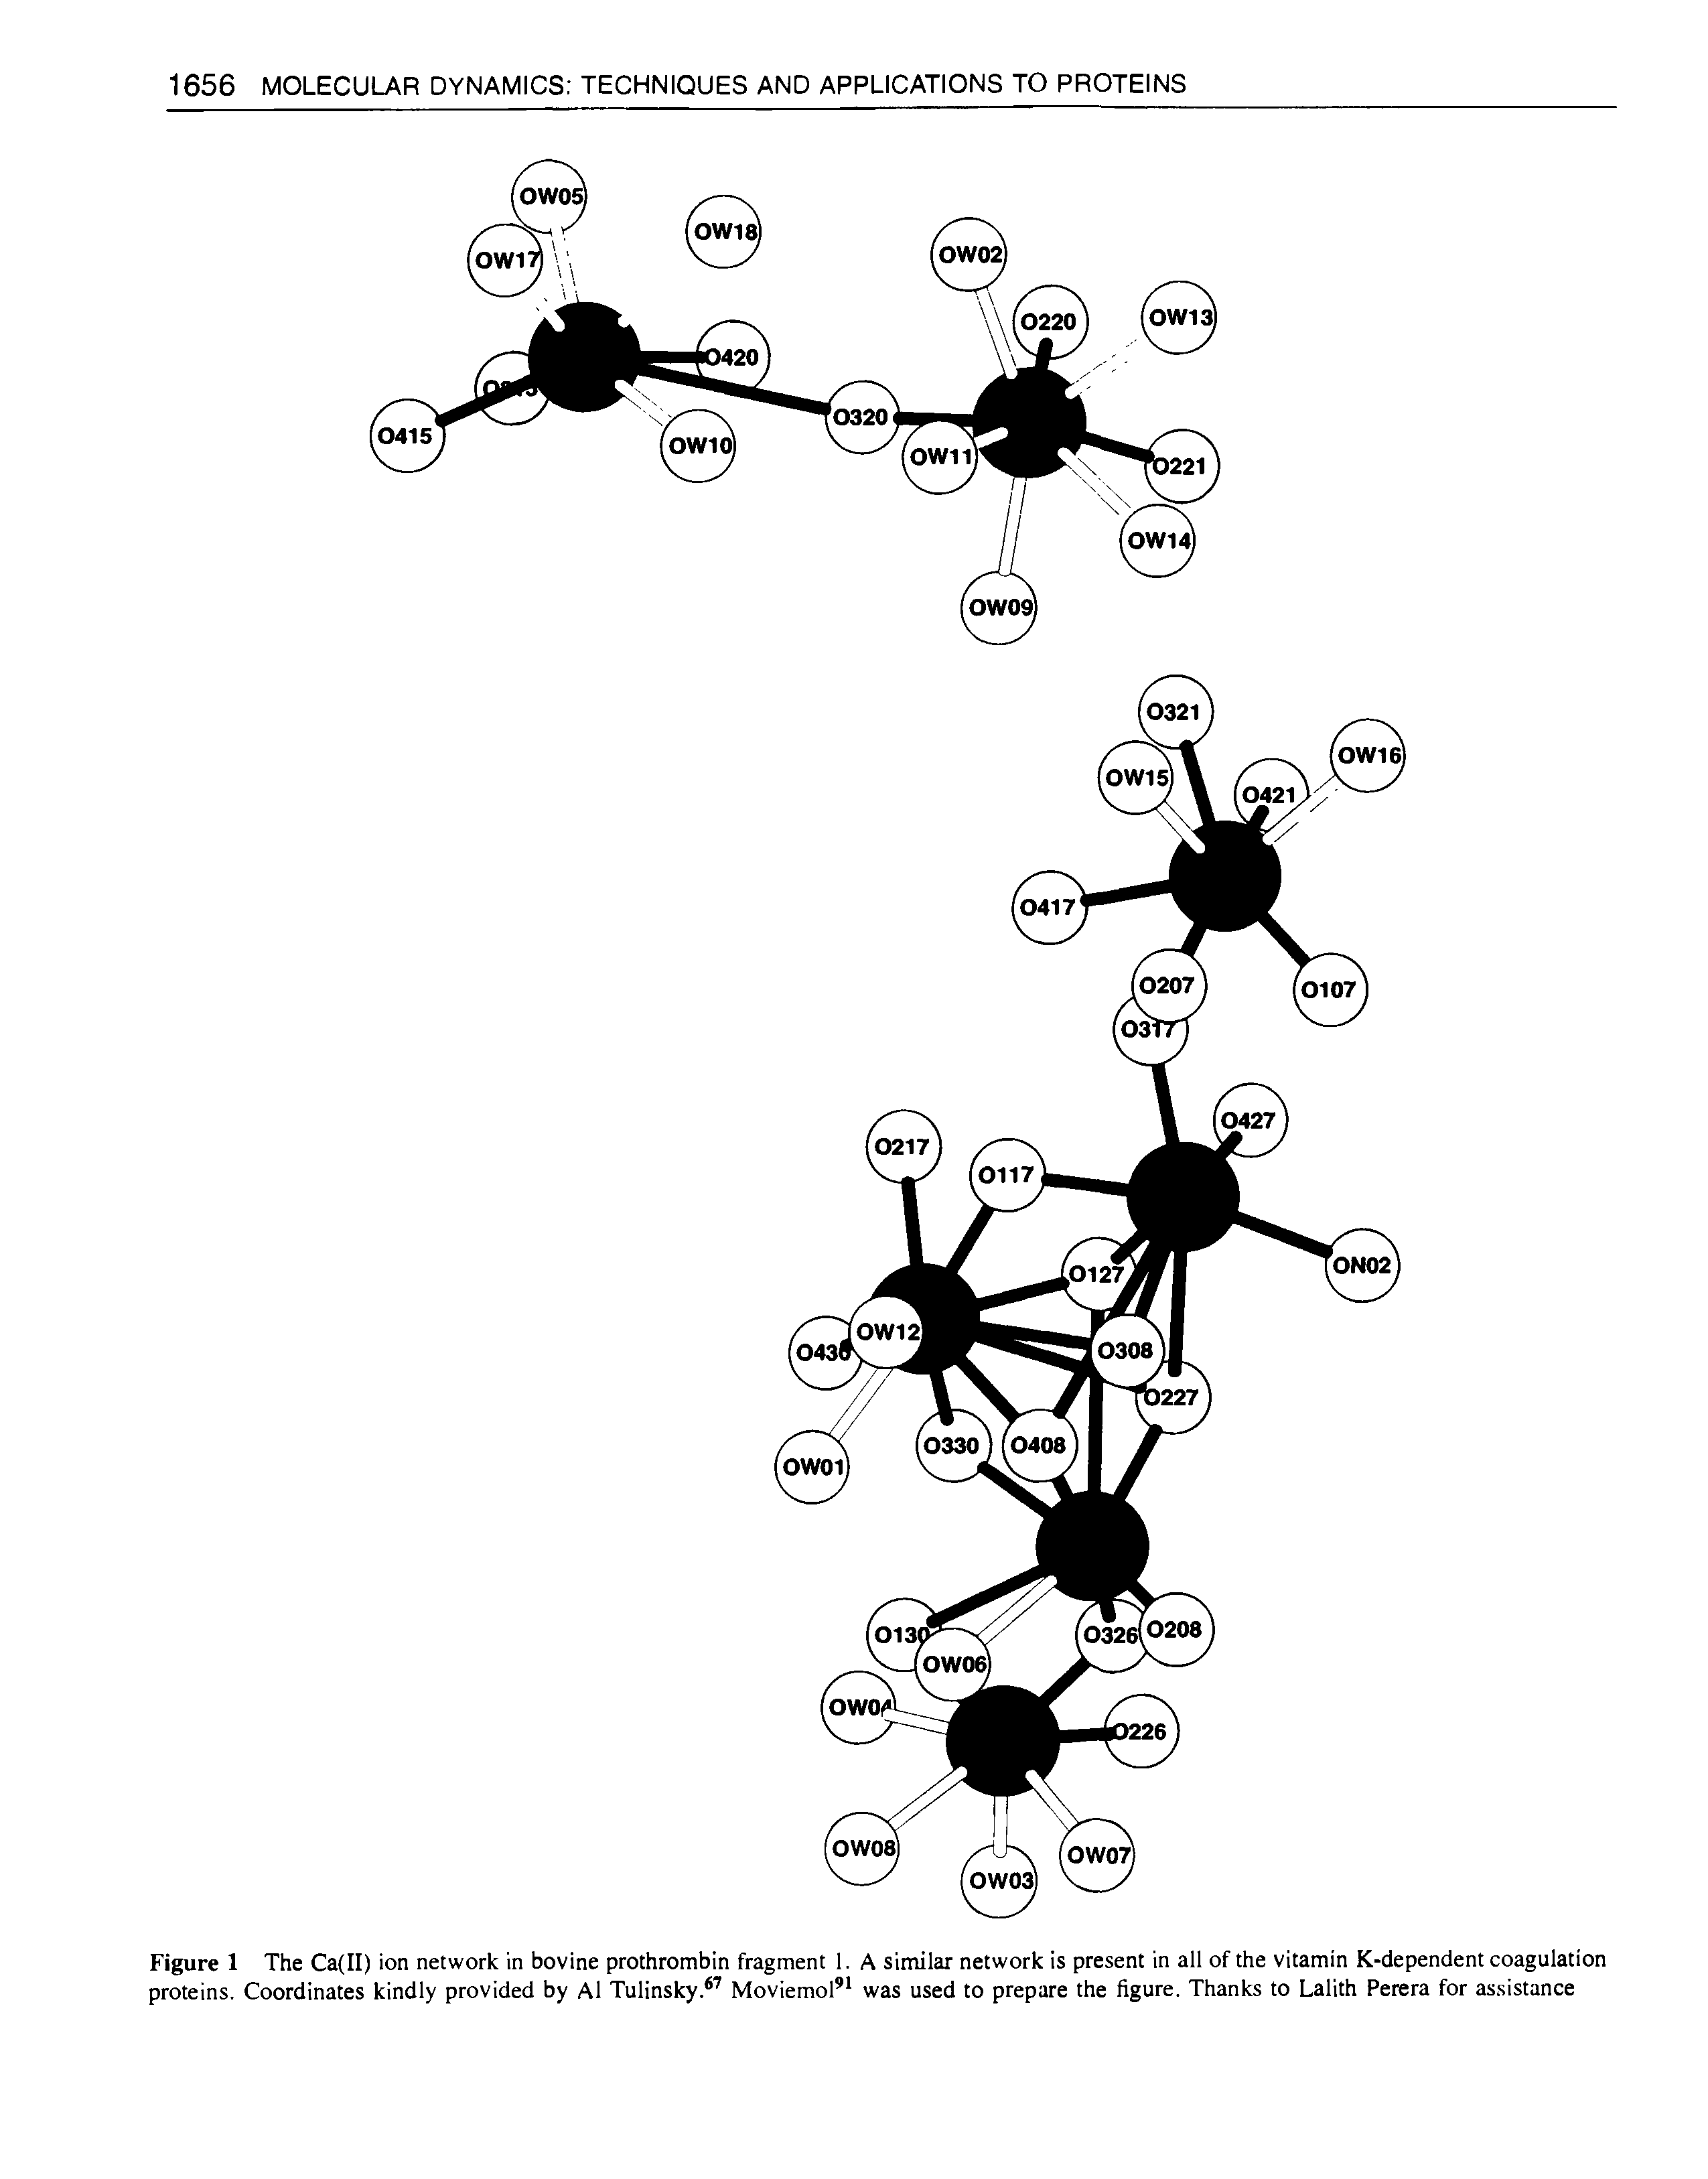 Figure 1 The Ca(II) ion network in bovine prothrombin fragment 1. A similar network is present in all of the vitamin K-dependent coagulation proteins. Coordinates kindly provided by A1 Tulinsky. Moviemol was used to prepare the figure. Thanks to Lallth Perera for assistance...